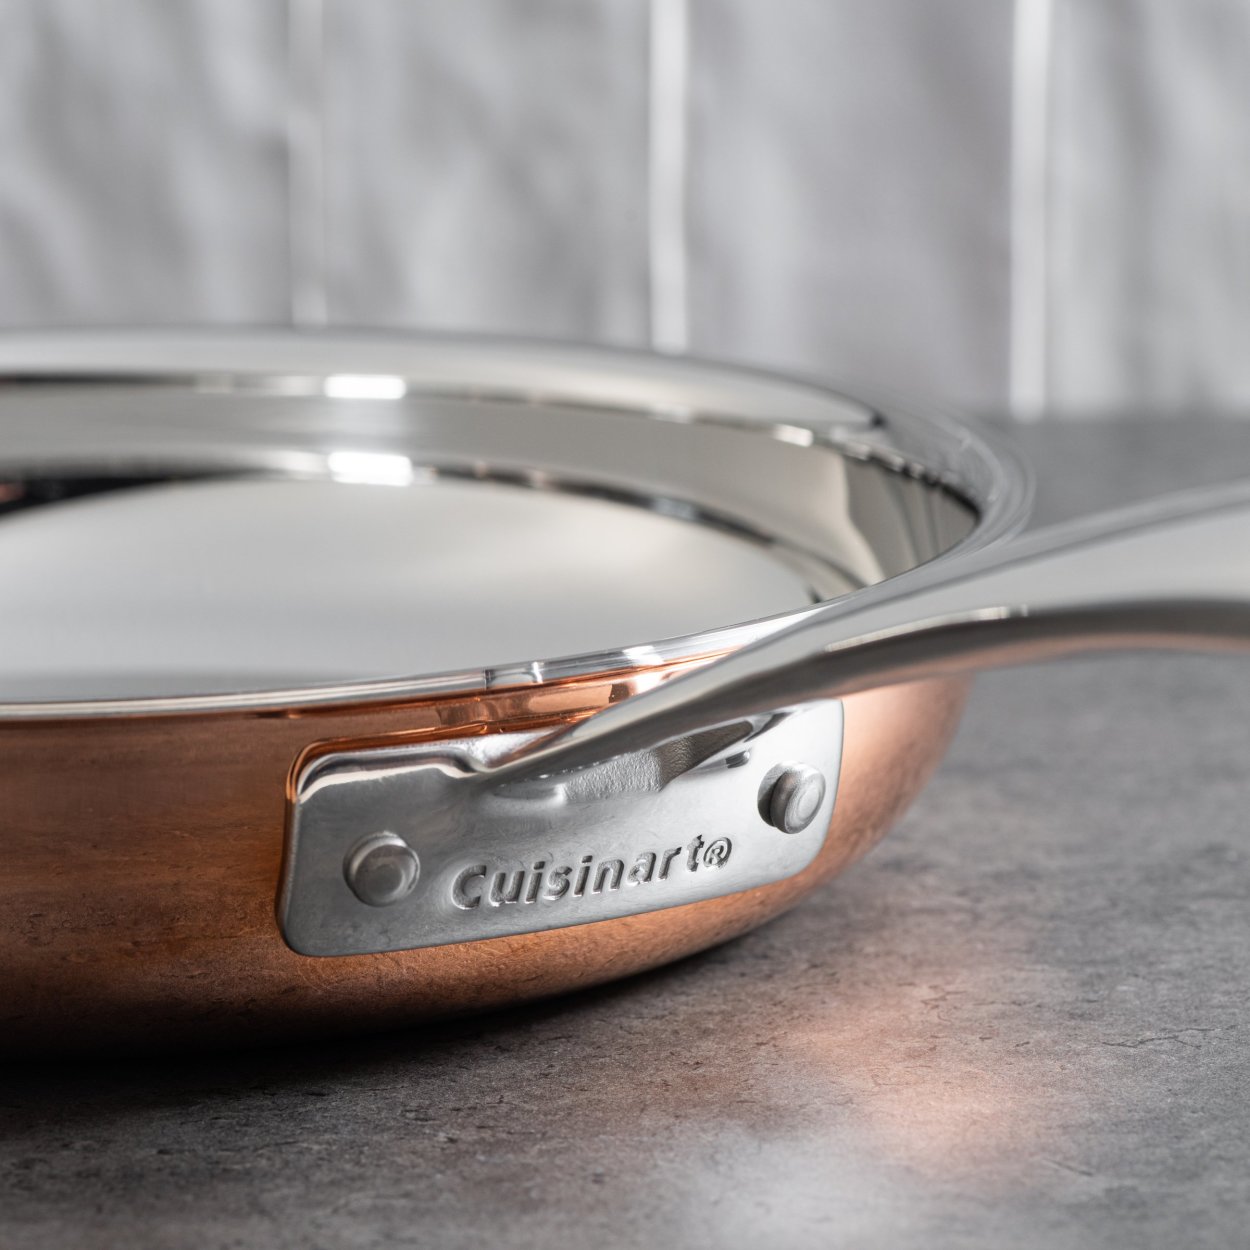 Cuisinart 8-Piece Copper Tri-Ply Stainless Steel Cookware Set